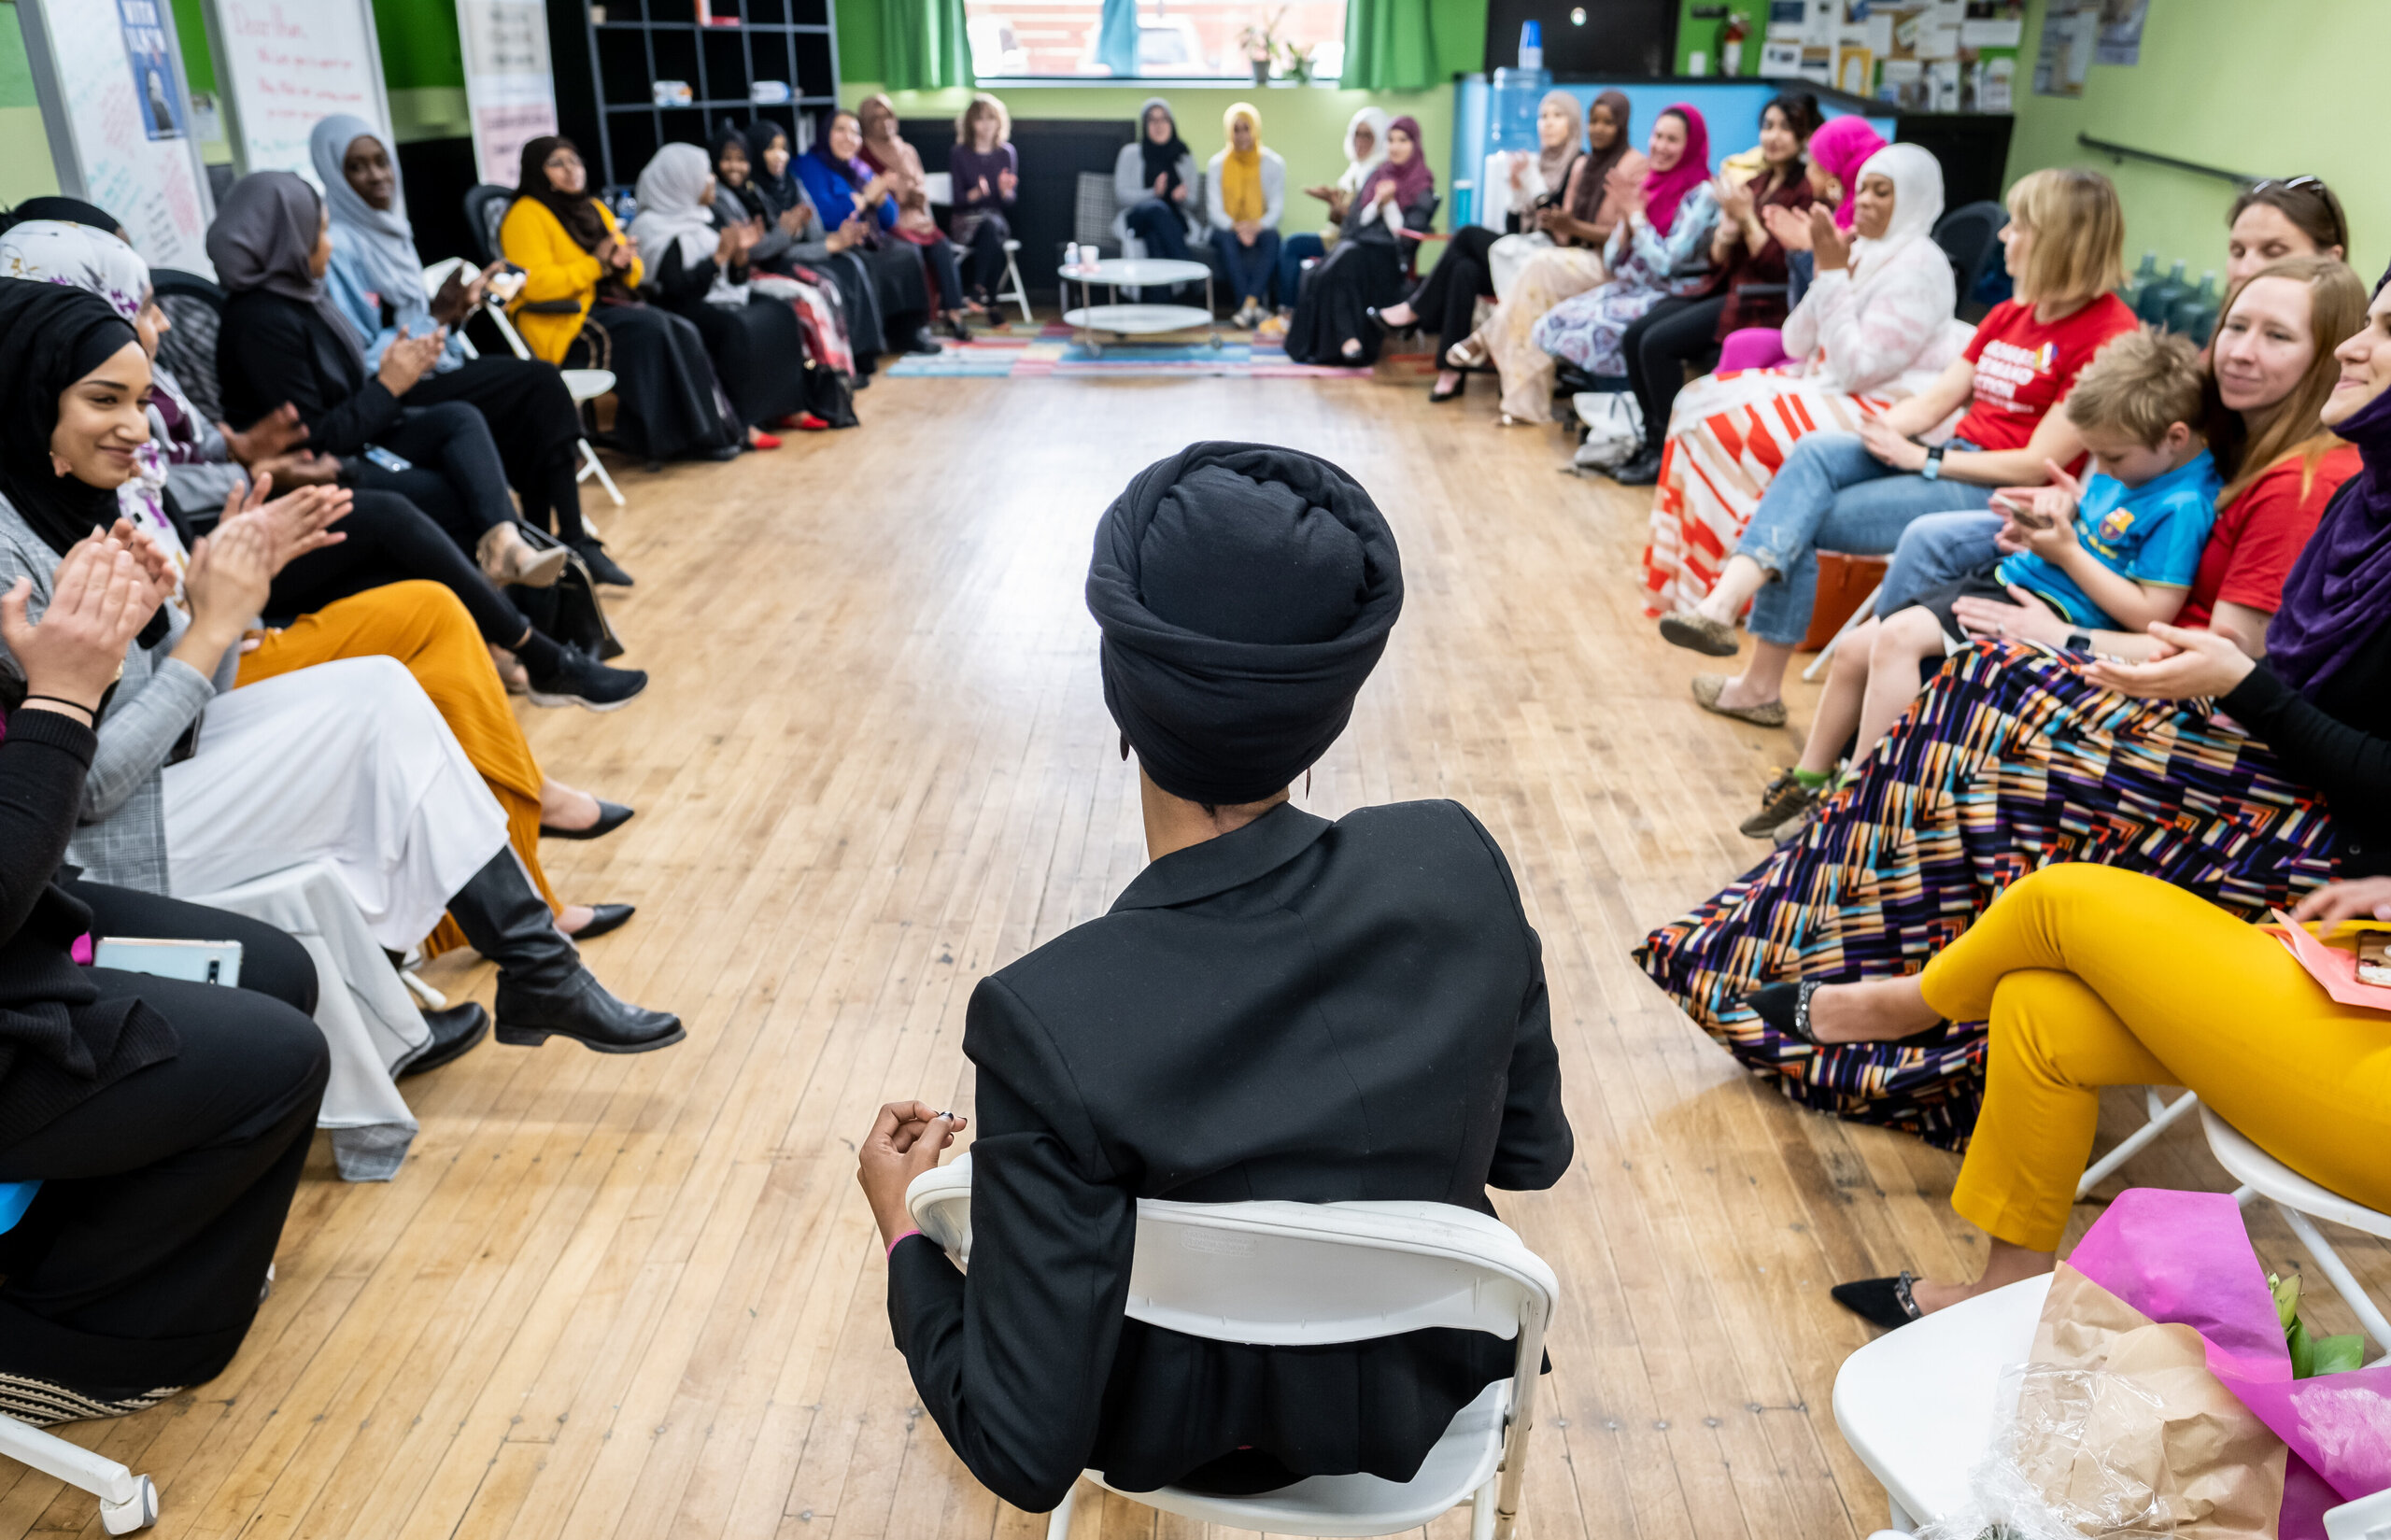 Rep. Ilhan Omar meets with community members at the RISE (Reviving Sisterhood) office in North Minneapolis on April 24, 2019.